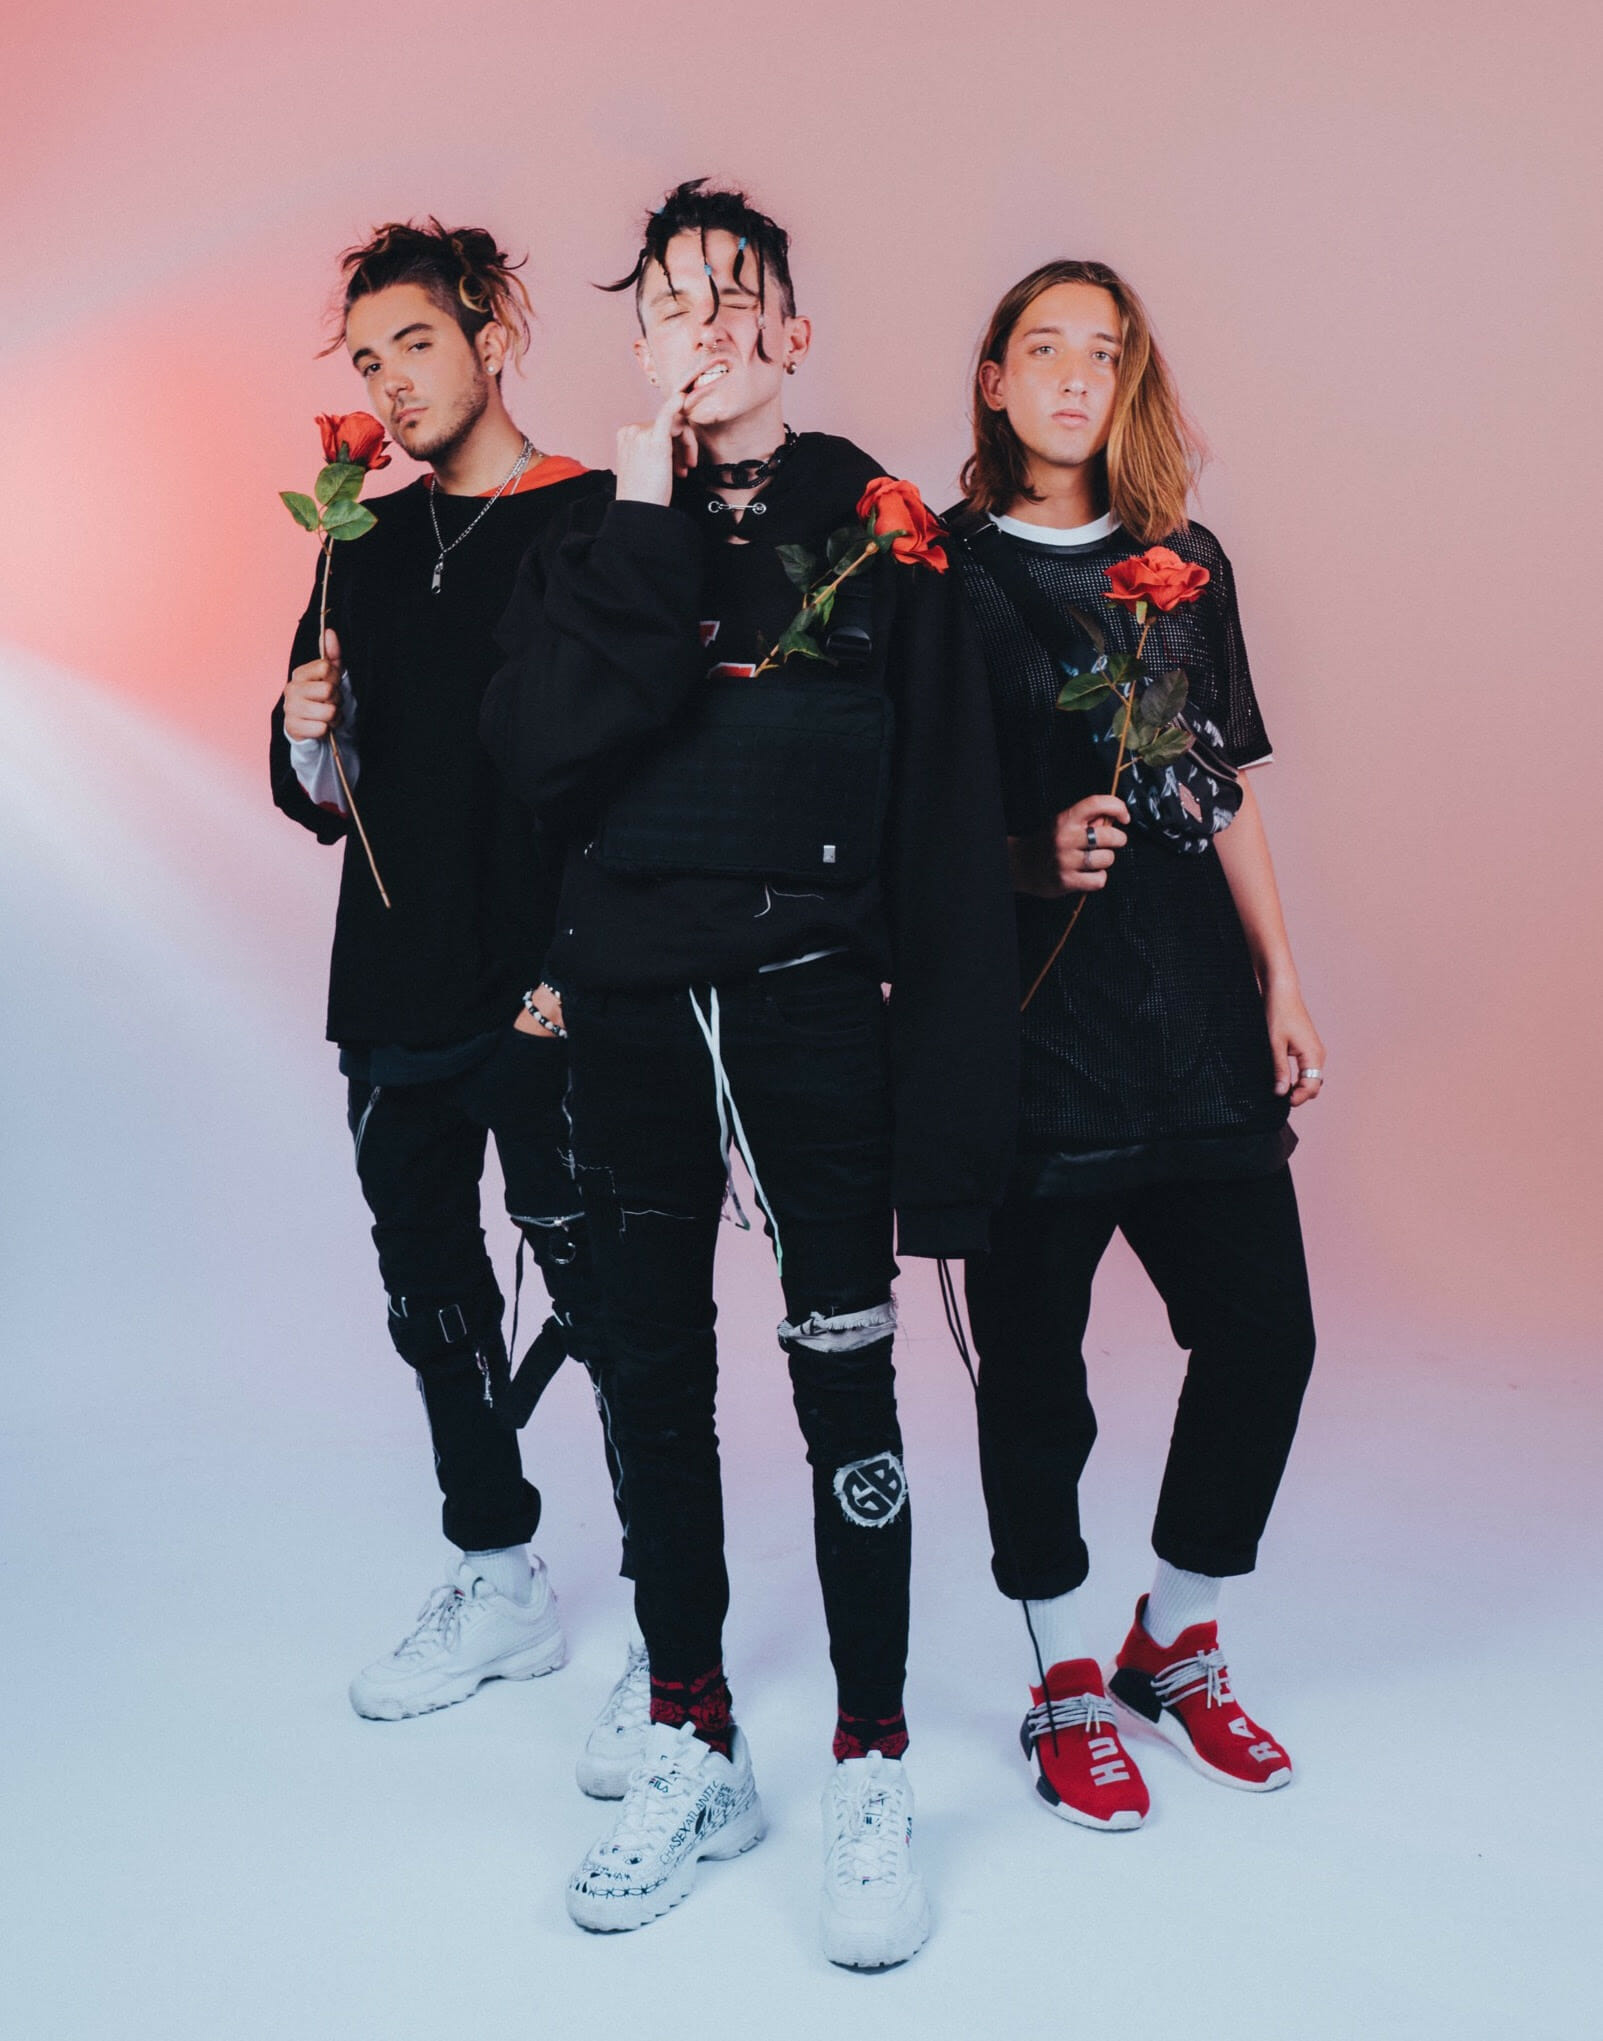 Chase Atlantic’s third EP ‘DON’T TRY THIS’ is here